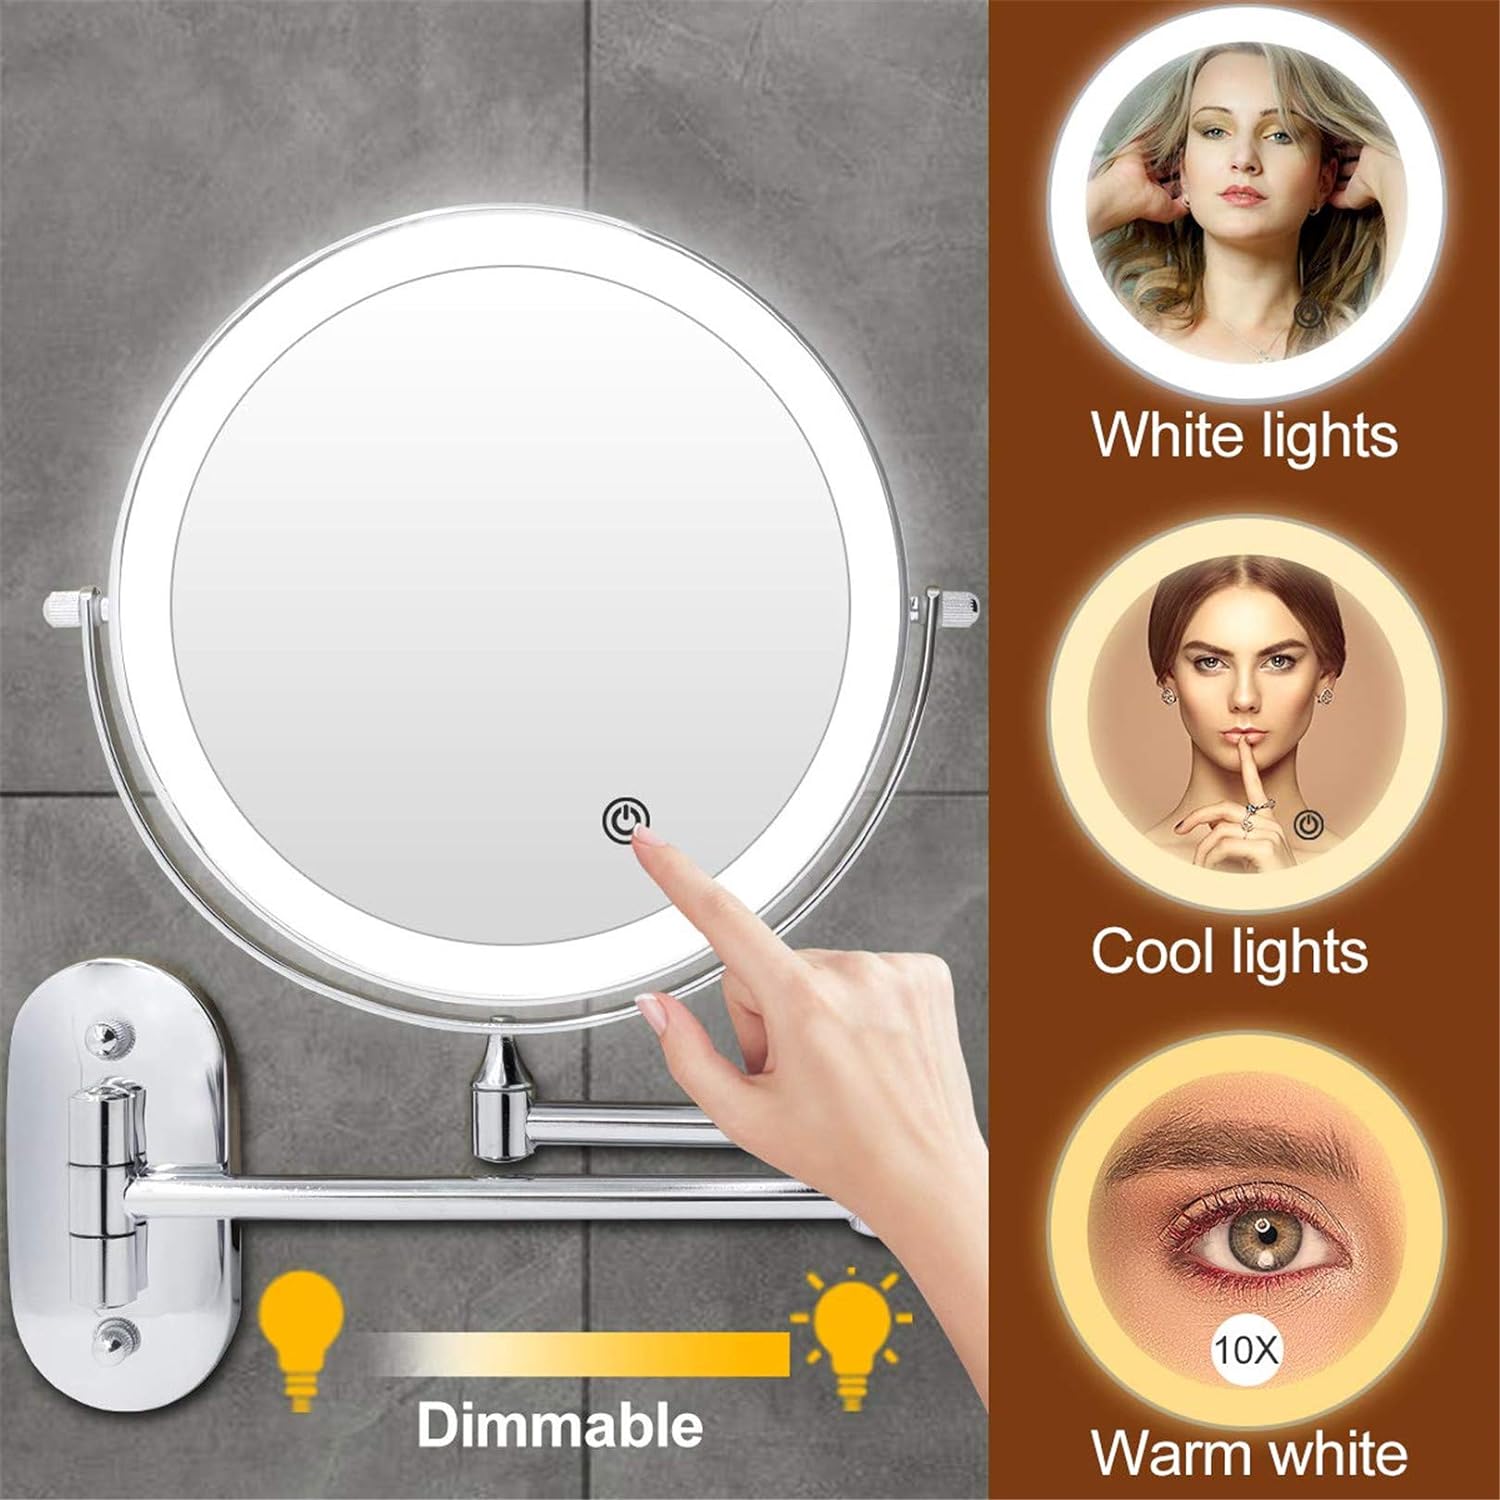 10x Magnifying Makeup Mirror, Lighted Makeup Mirrors With Magnification